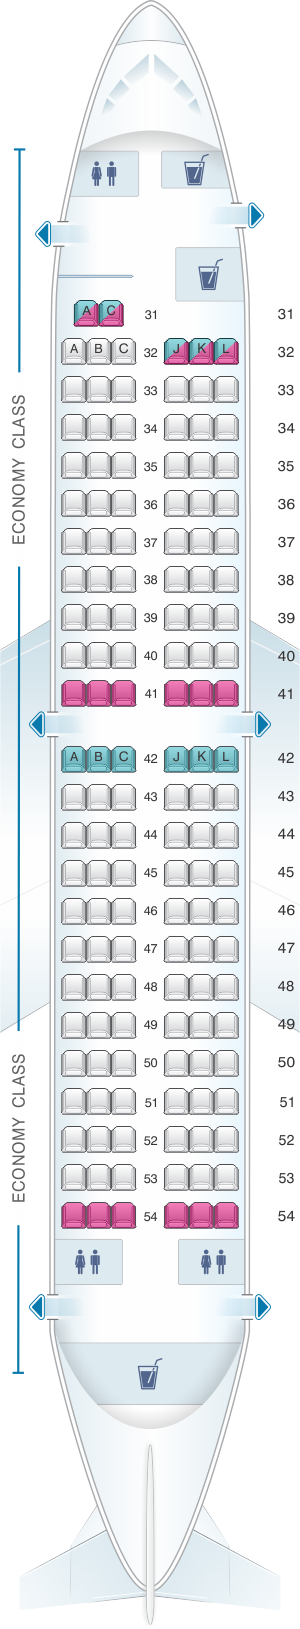 Seat map for China Eastern Airlines Boeing B737 700 140PAX